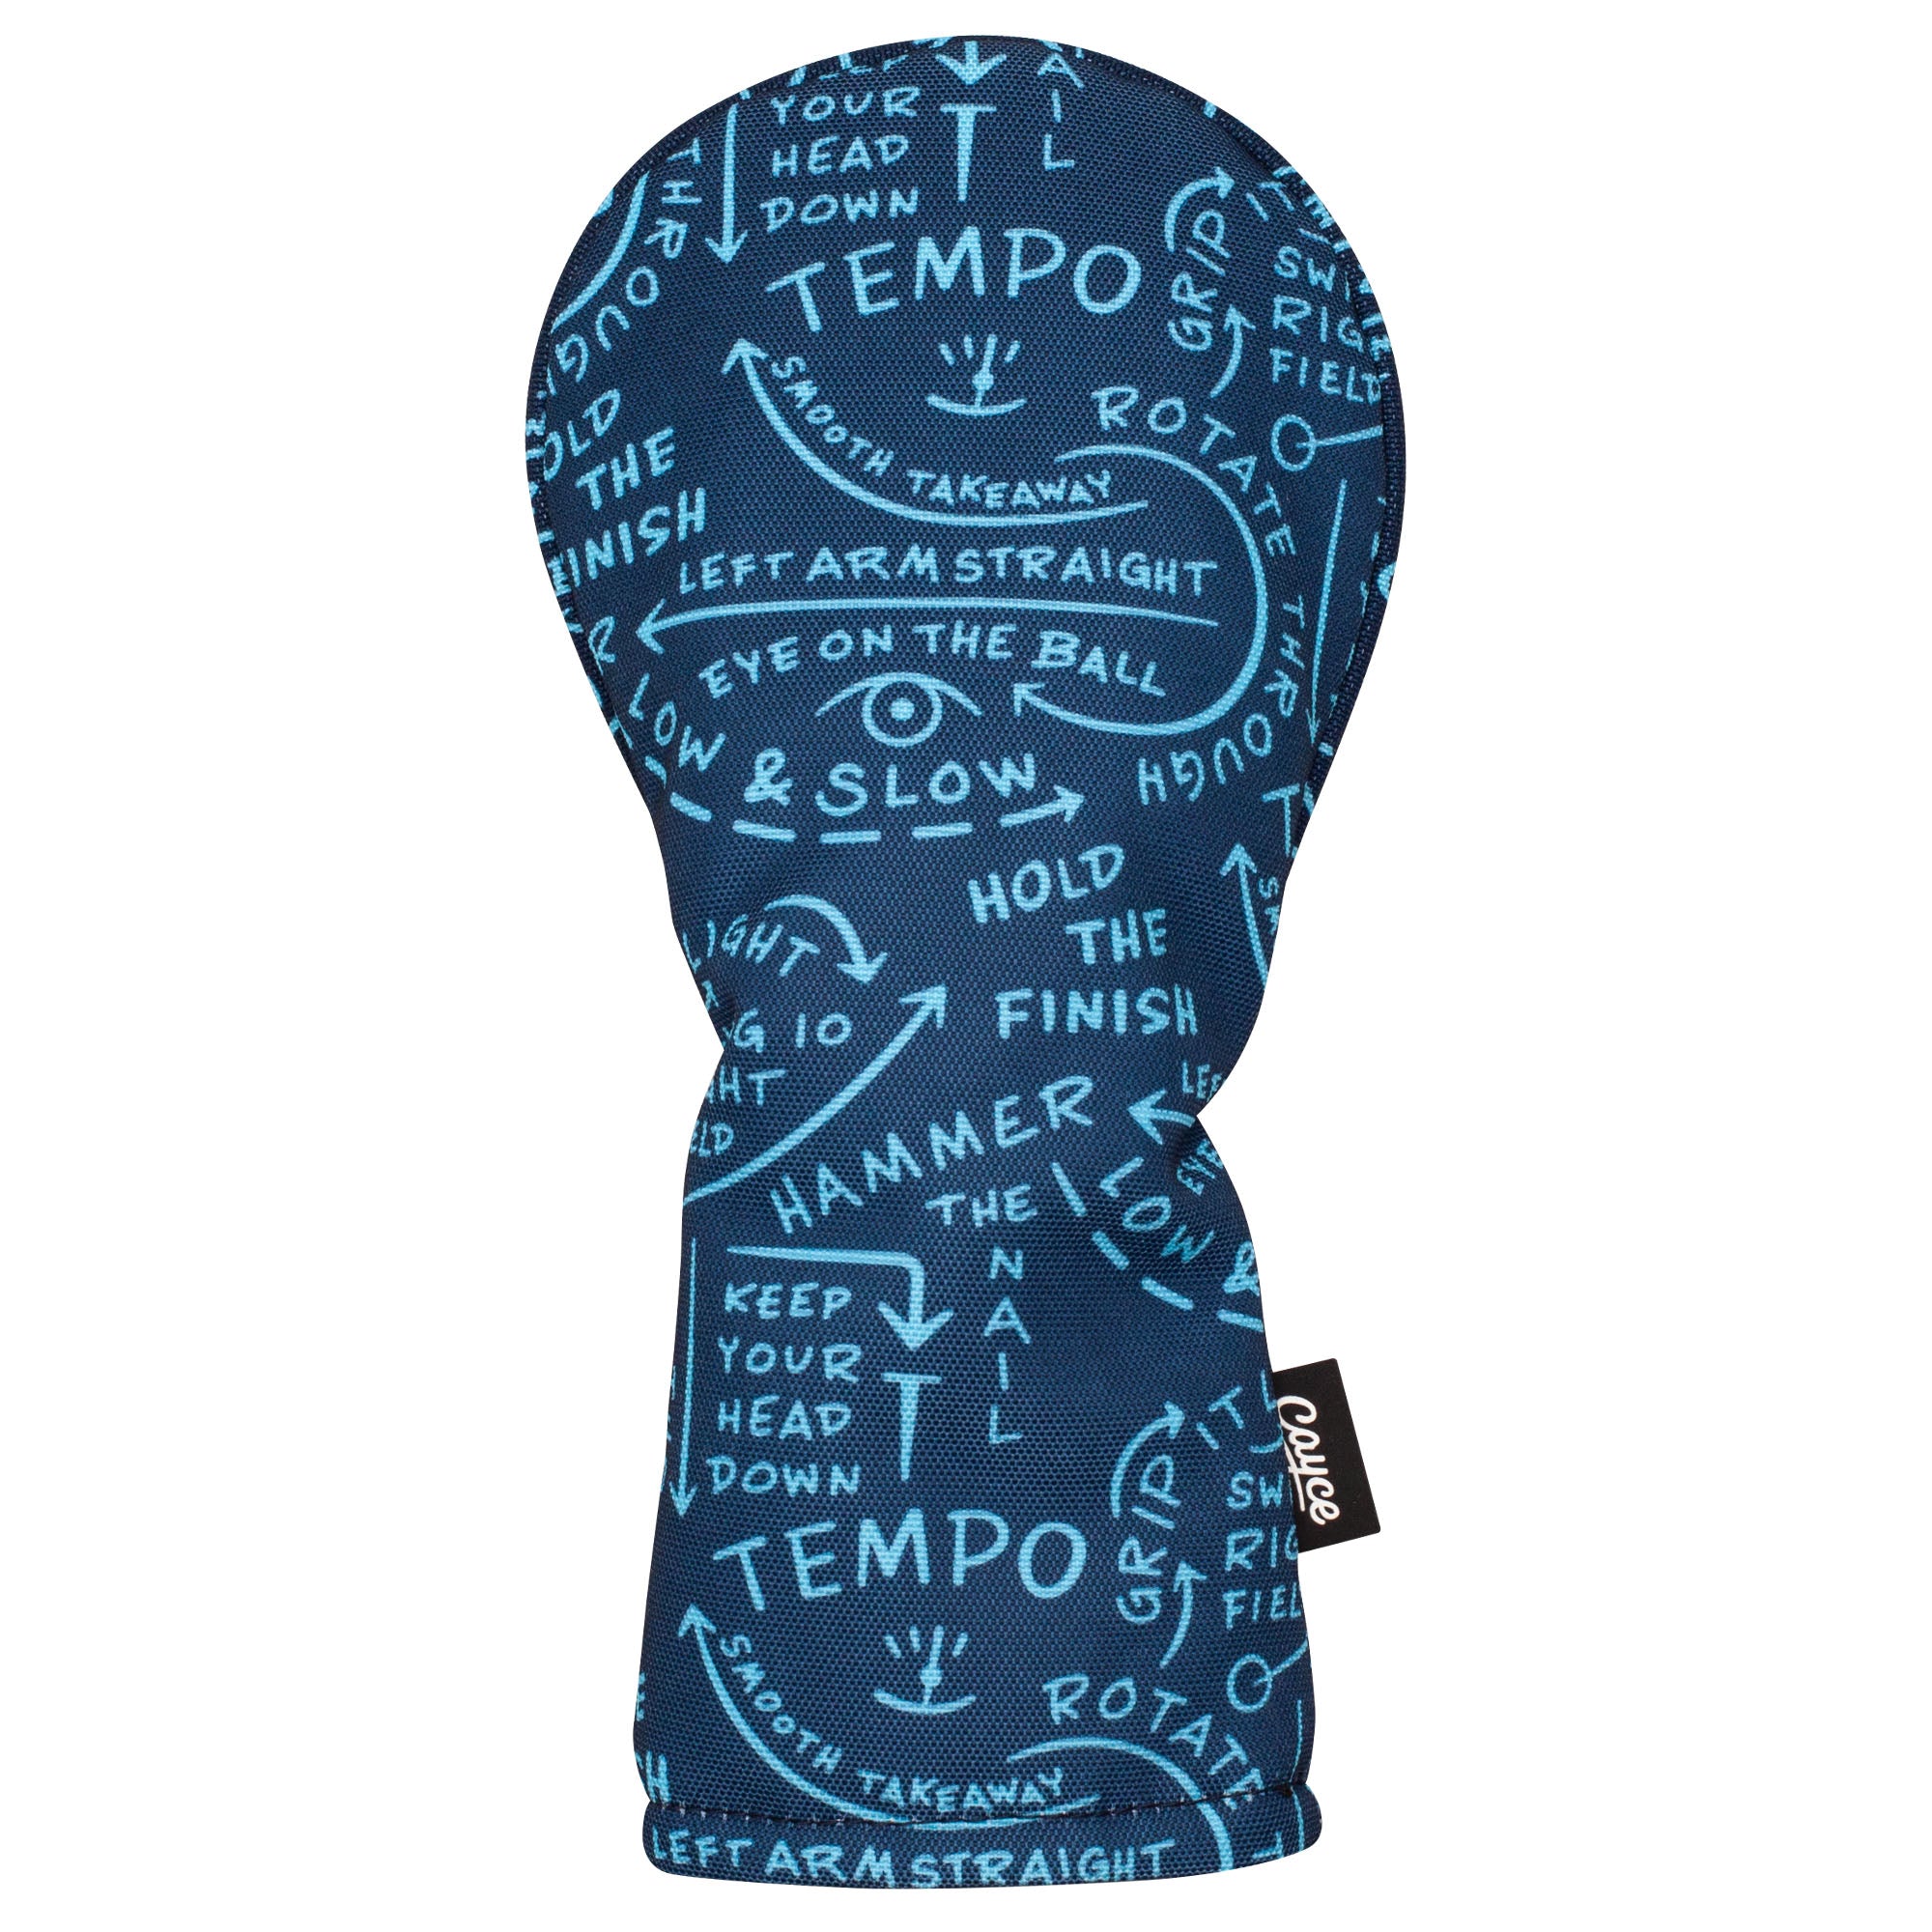 navy, hourglass shaped hybrid headcover with blueprint style "swing thoughts" pattern written all over the cover sitting on a white background